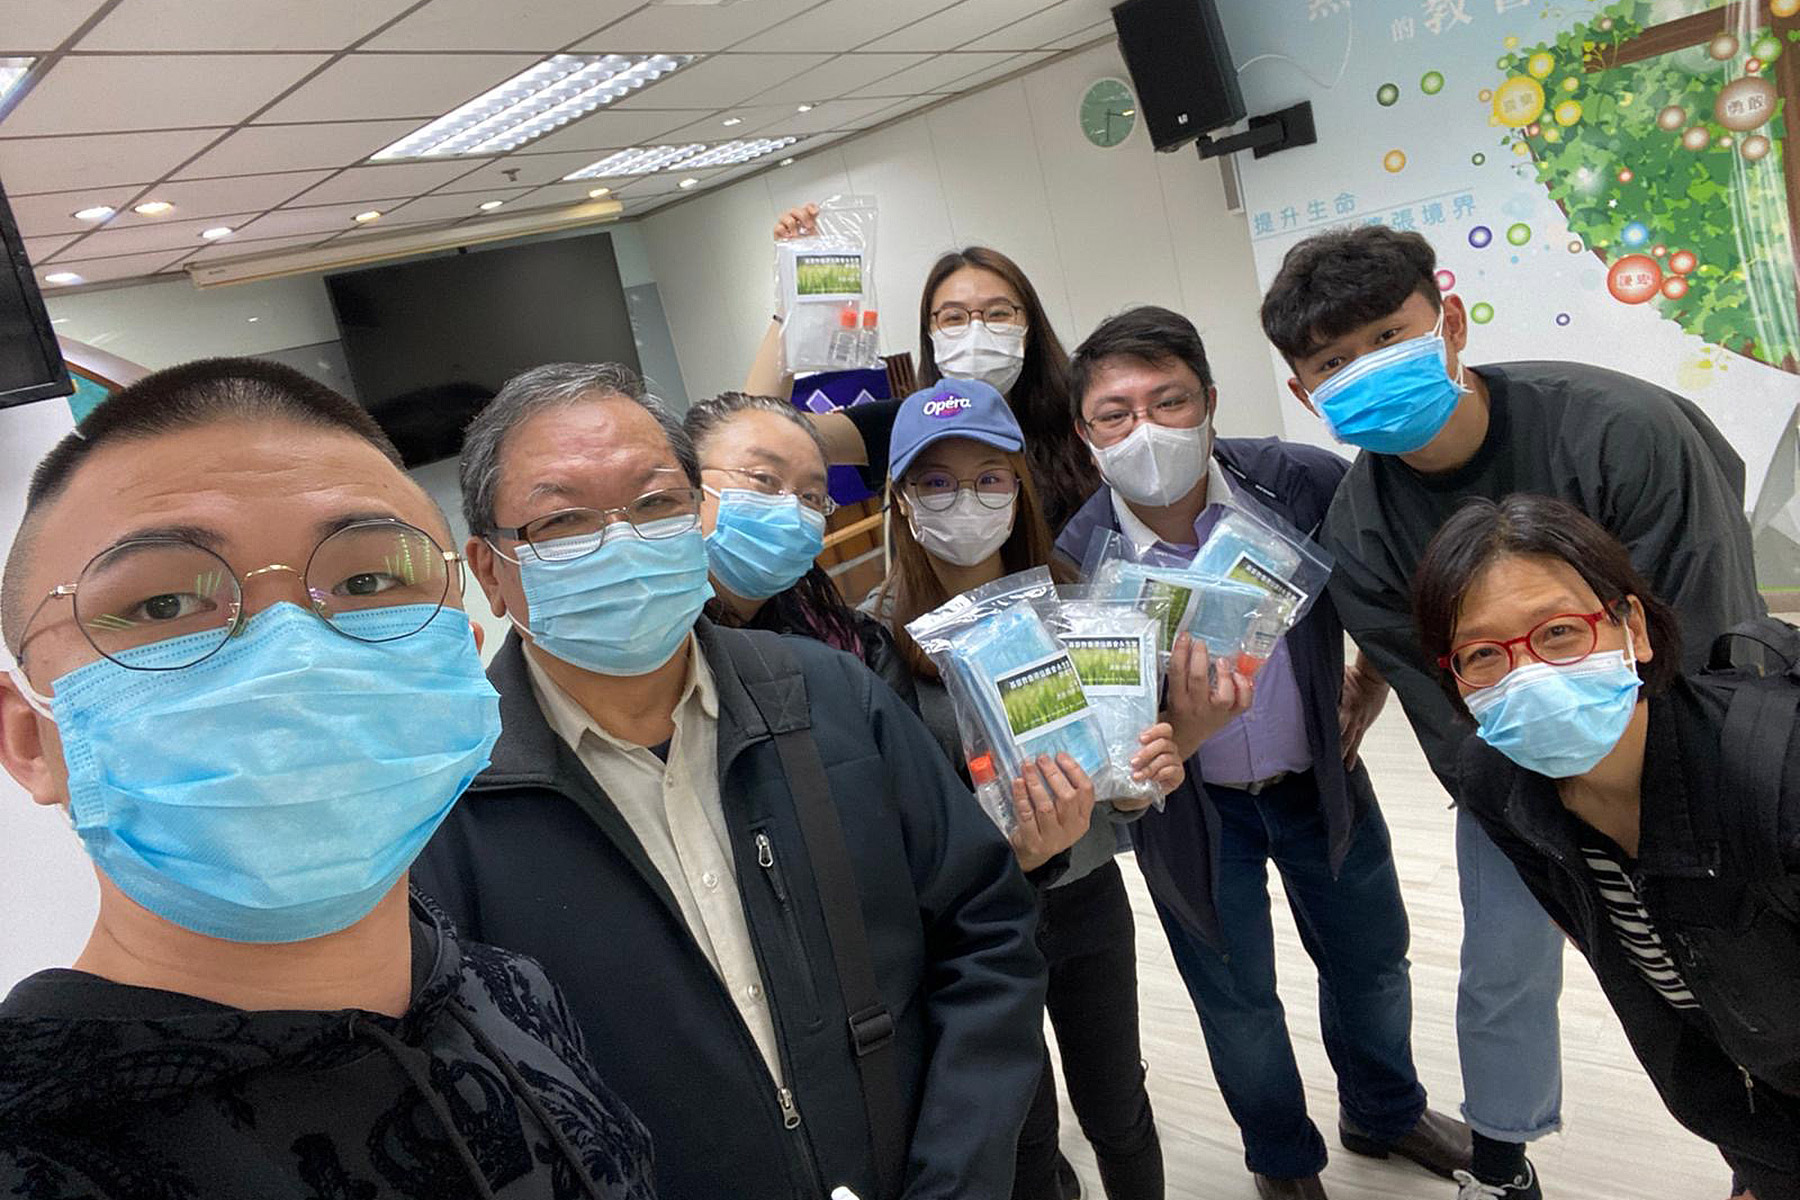 Volunteers at the Eternal Life Lutheran Church are grateful for all contributions to their outreach ministry, including face masks sent by the Lutheran Youth Network in Indonesia